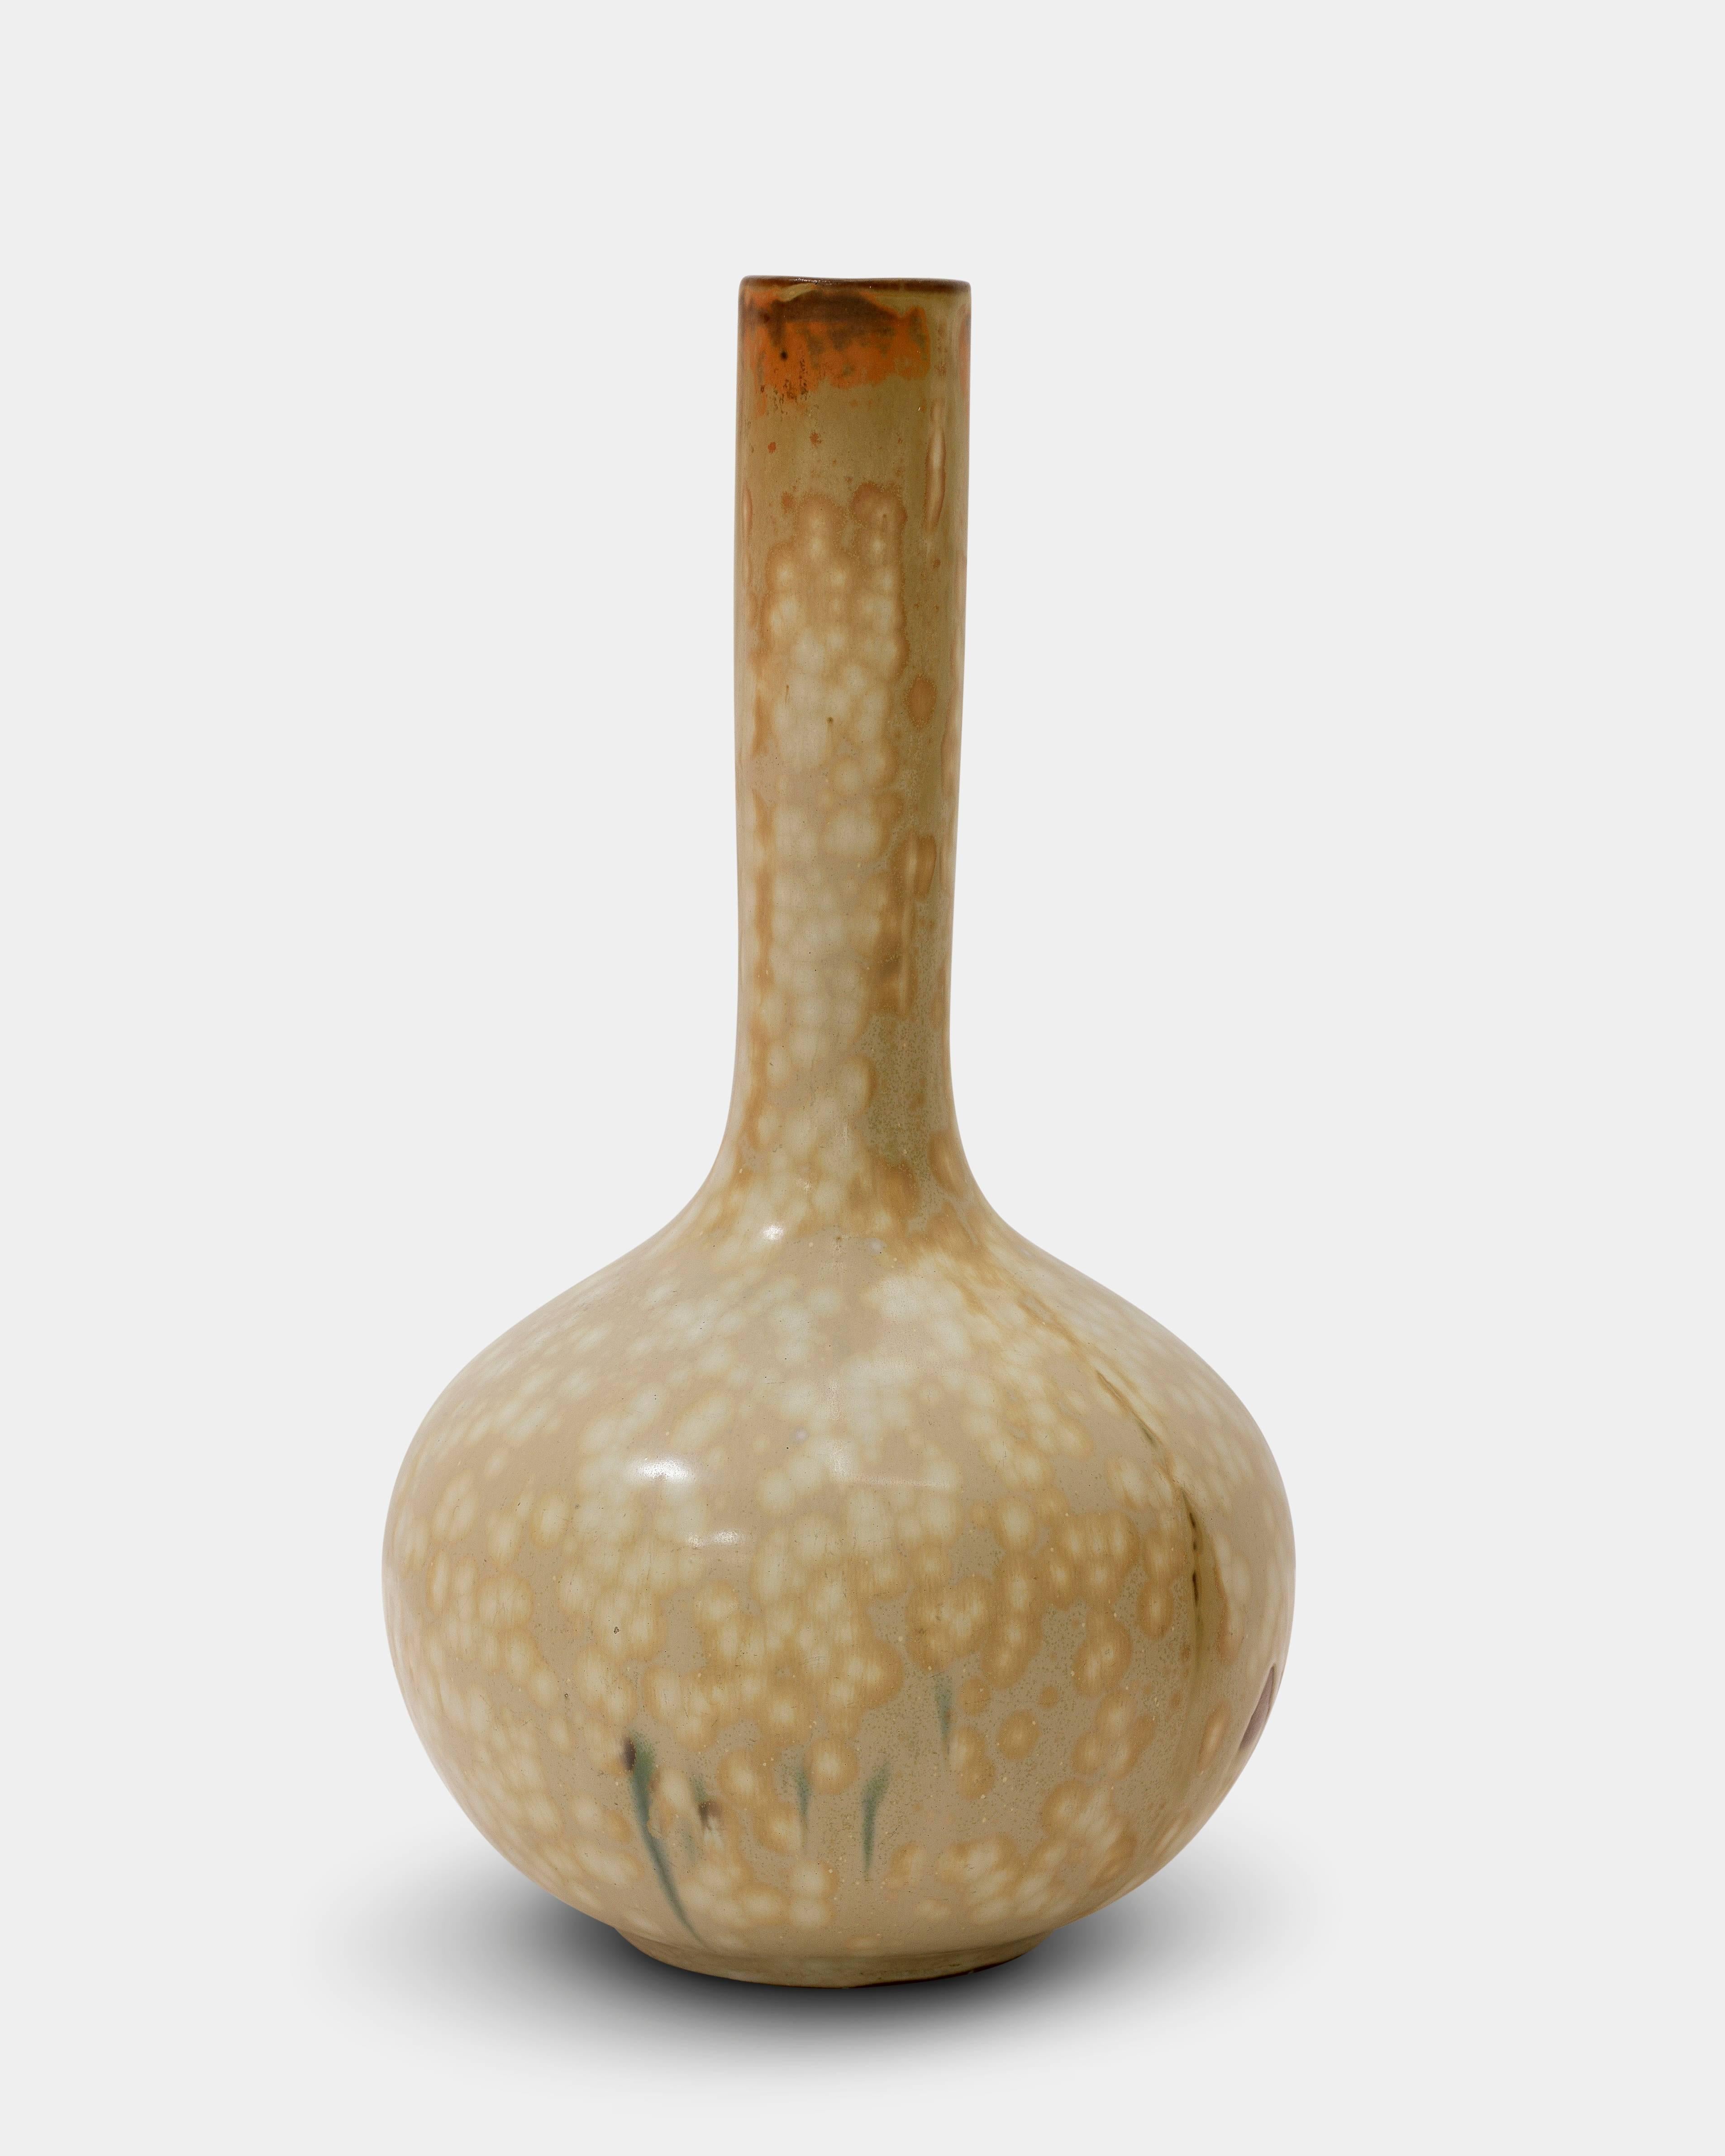 Axel Salto (1889-1961):

Stoneware vase decorated with matte crystalline glaze in great and peach color.
Manufactured in the 1940-1950s for Royal Copenhagen.
Signed 